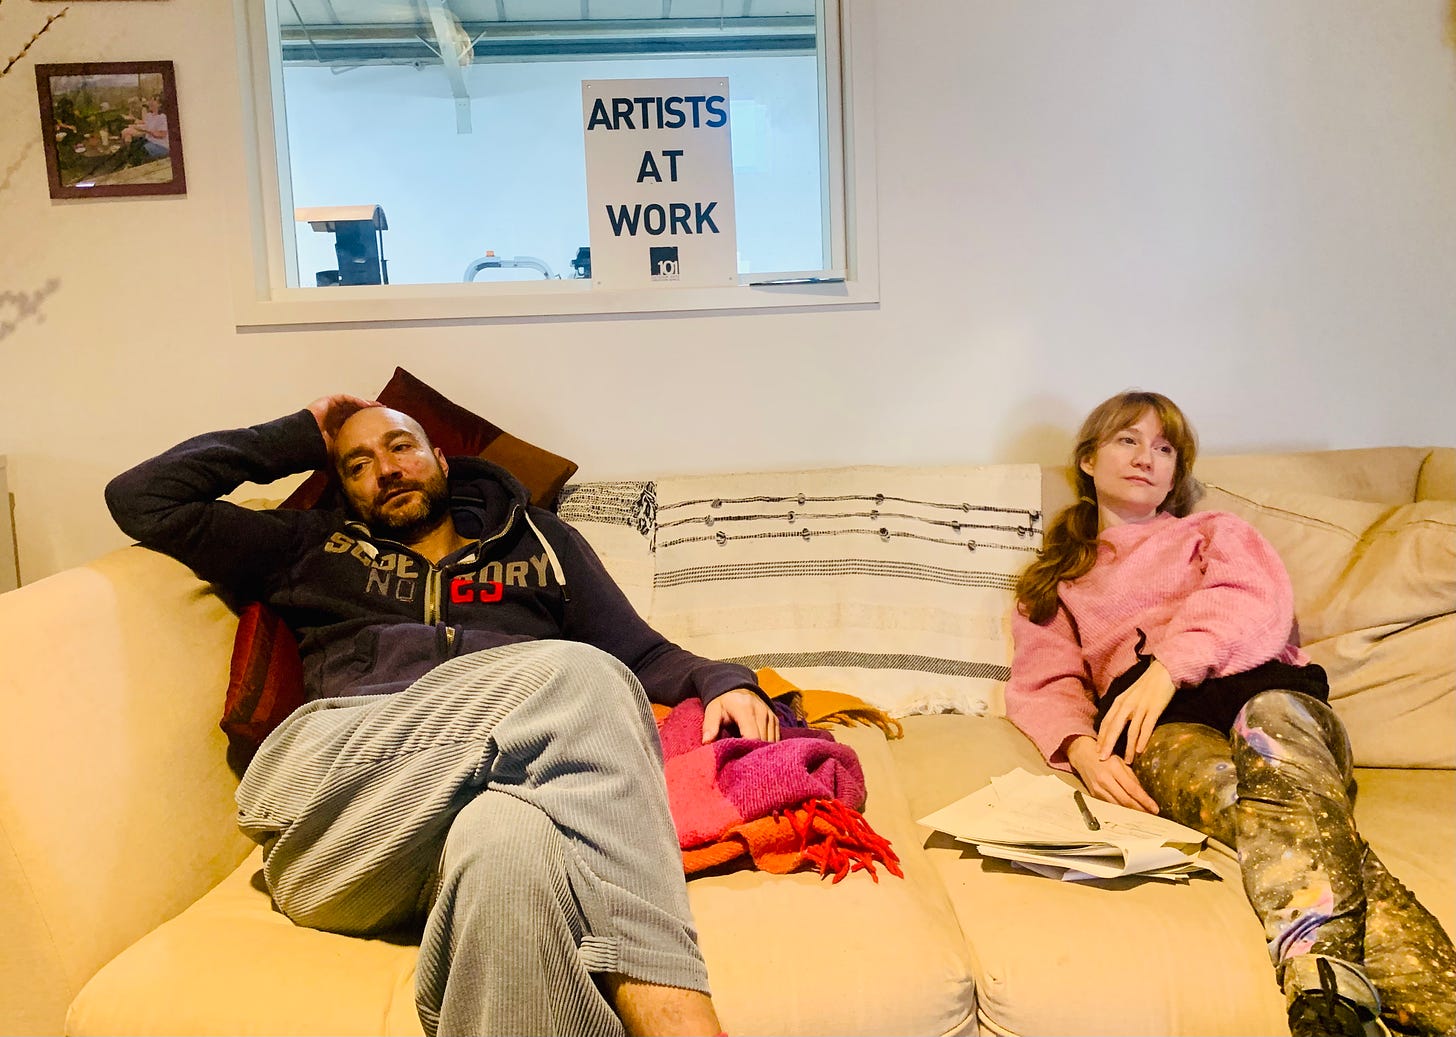 A man and a woman lie on a sofa. Behind them is a sign which reads "Artists at work"